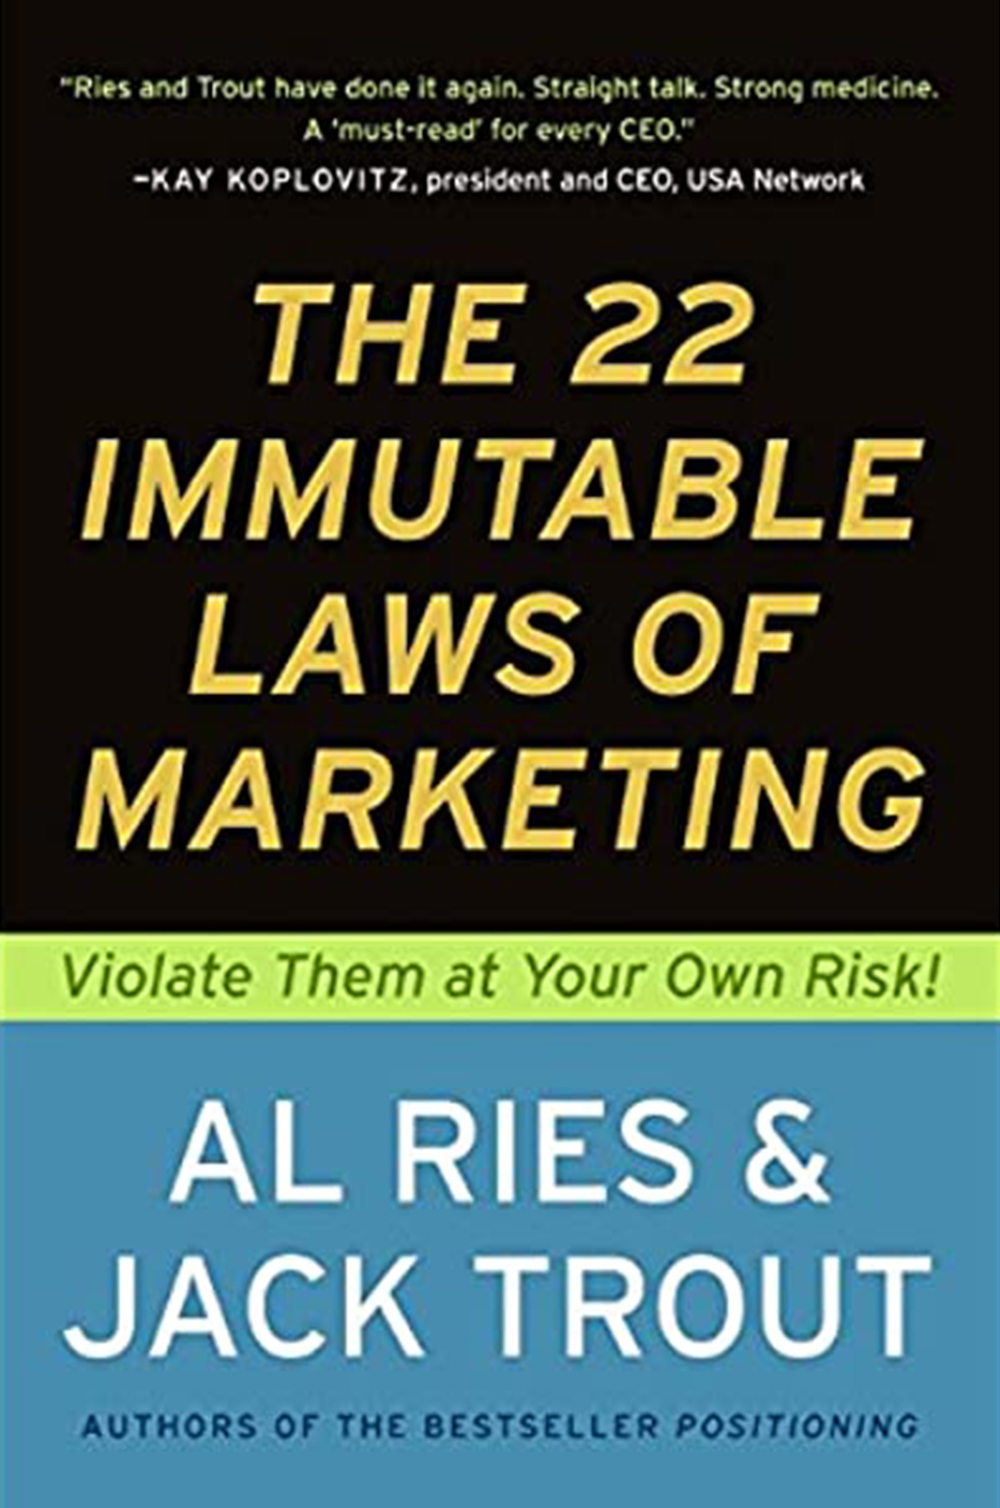 “The 22 Immutable Laws of Marketing” by Ries and Trout